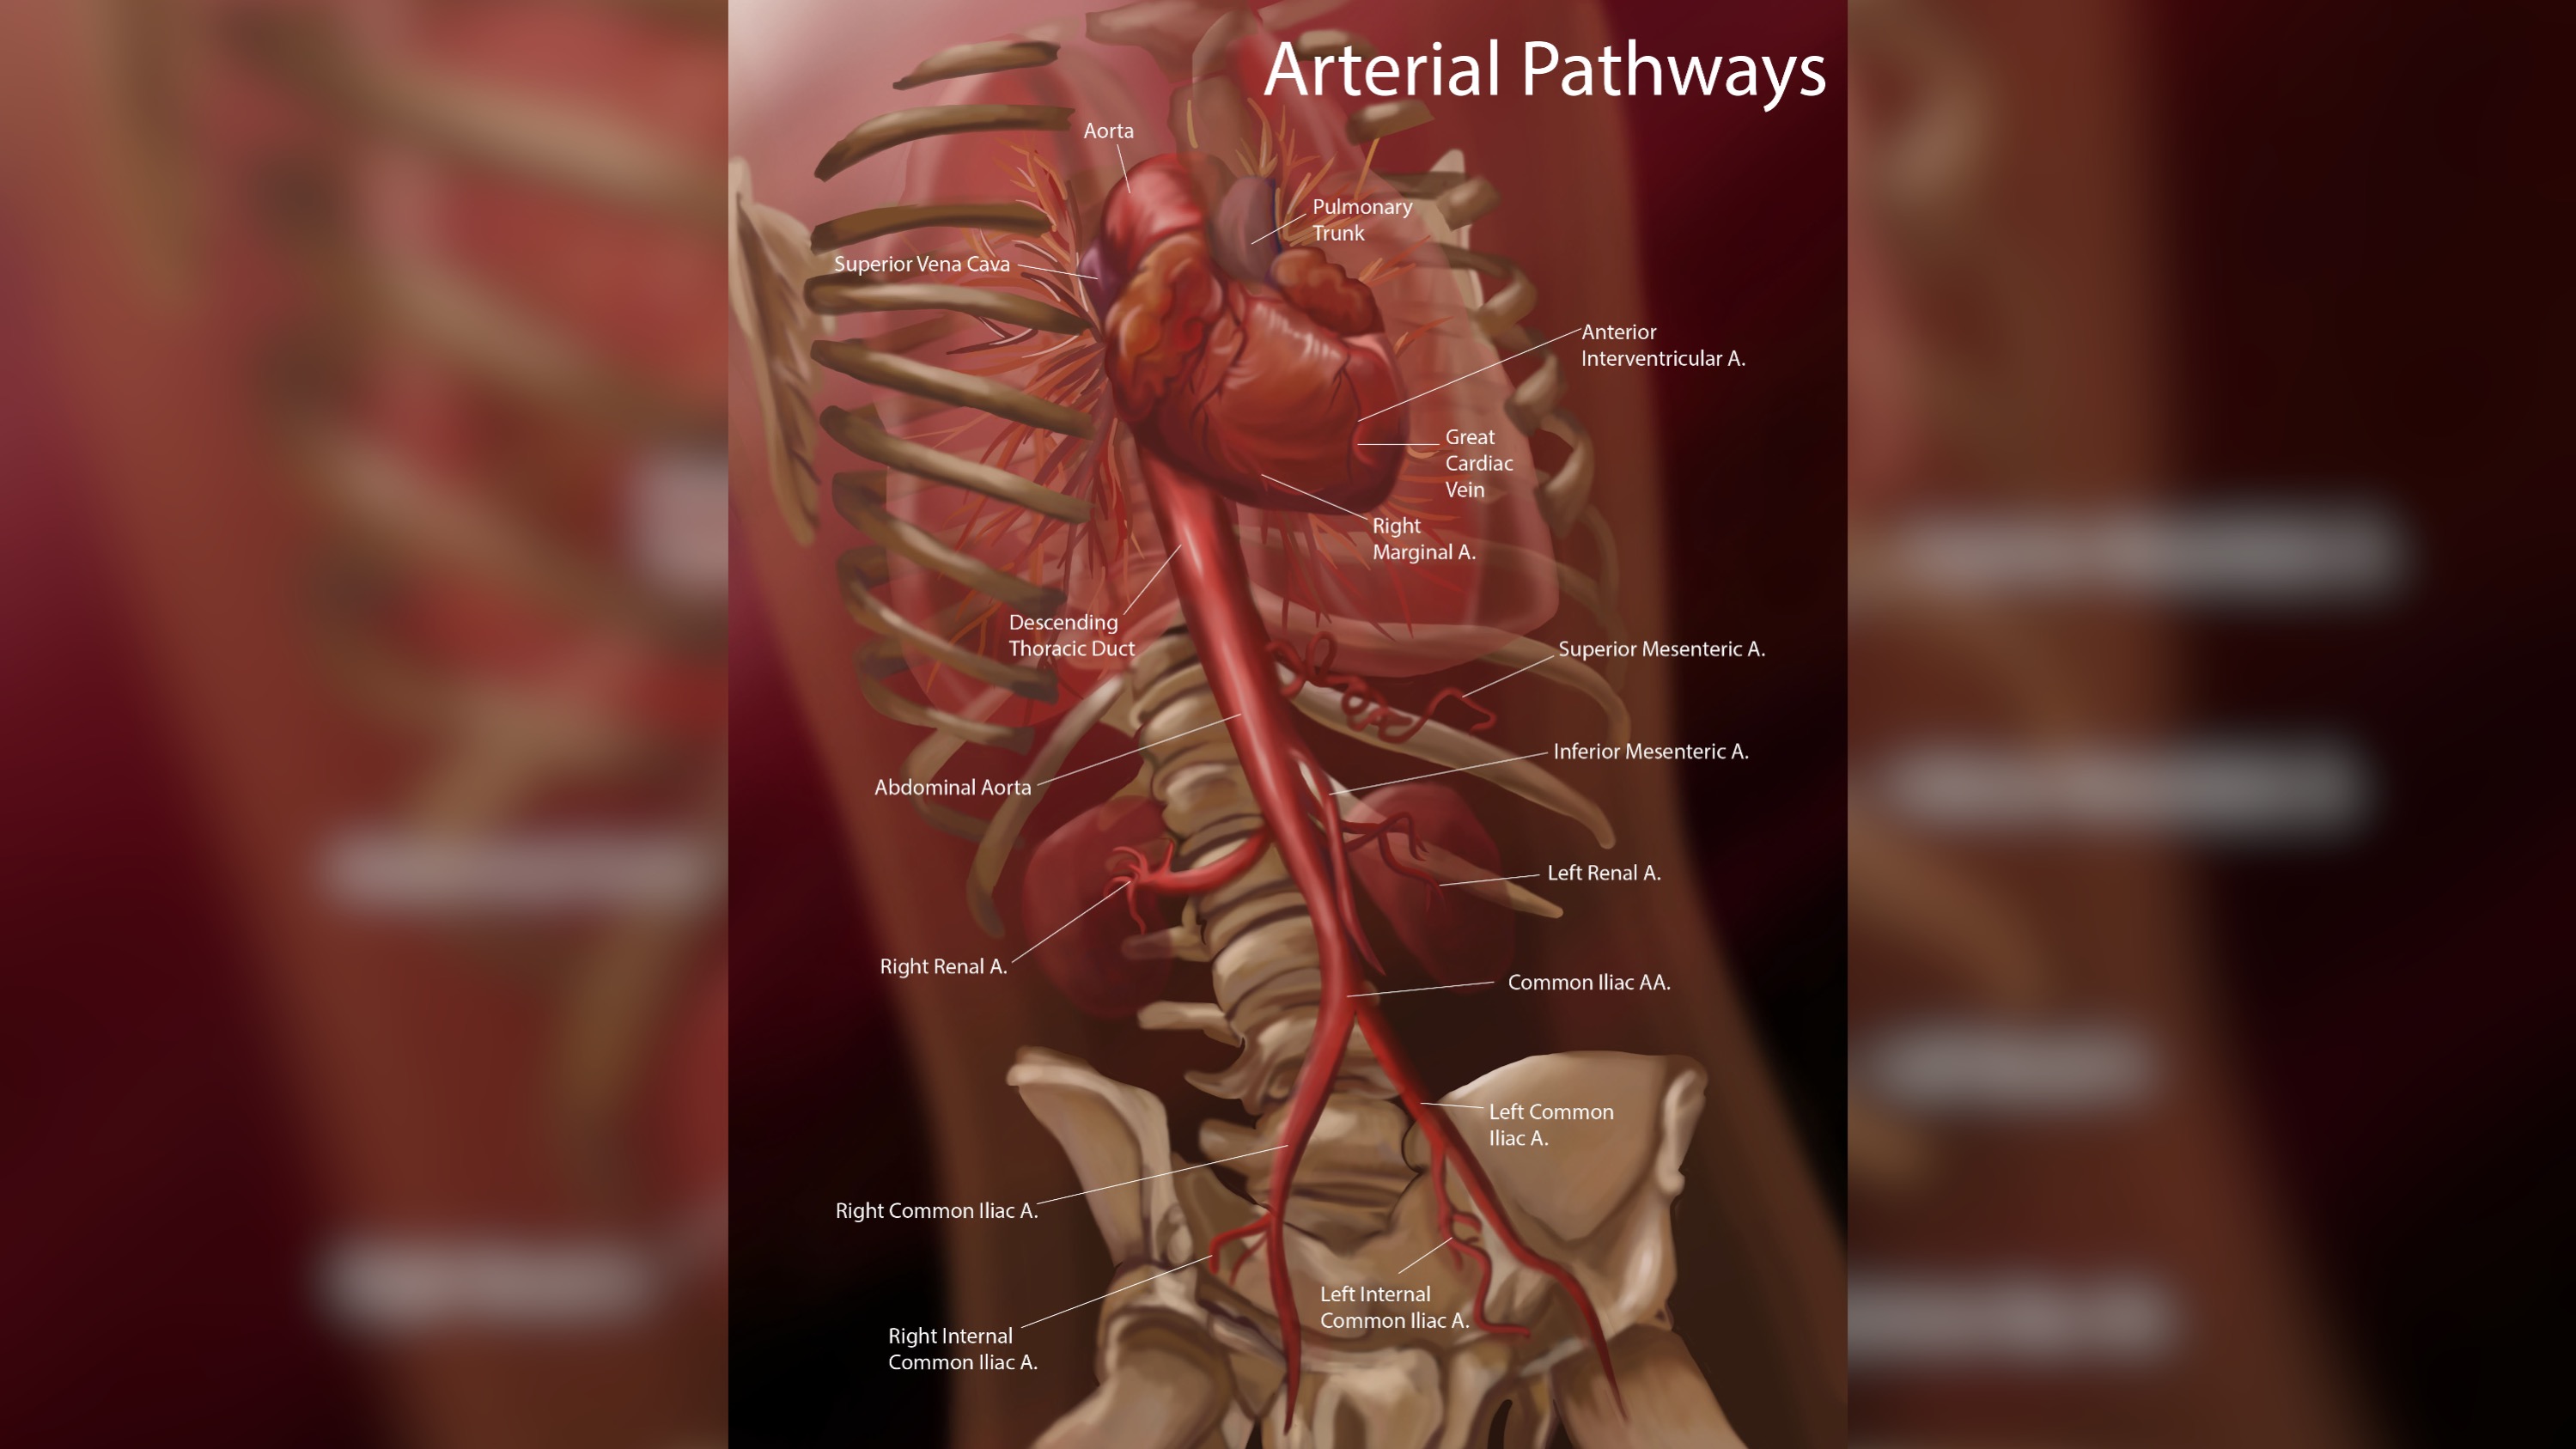 An illustration educating about arterial pathways.